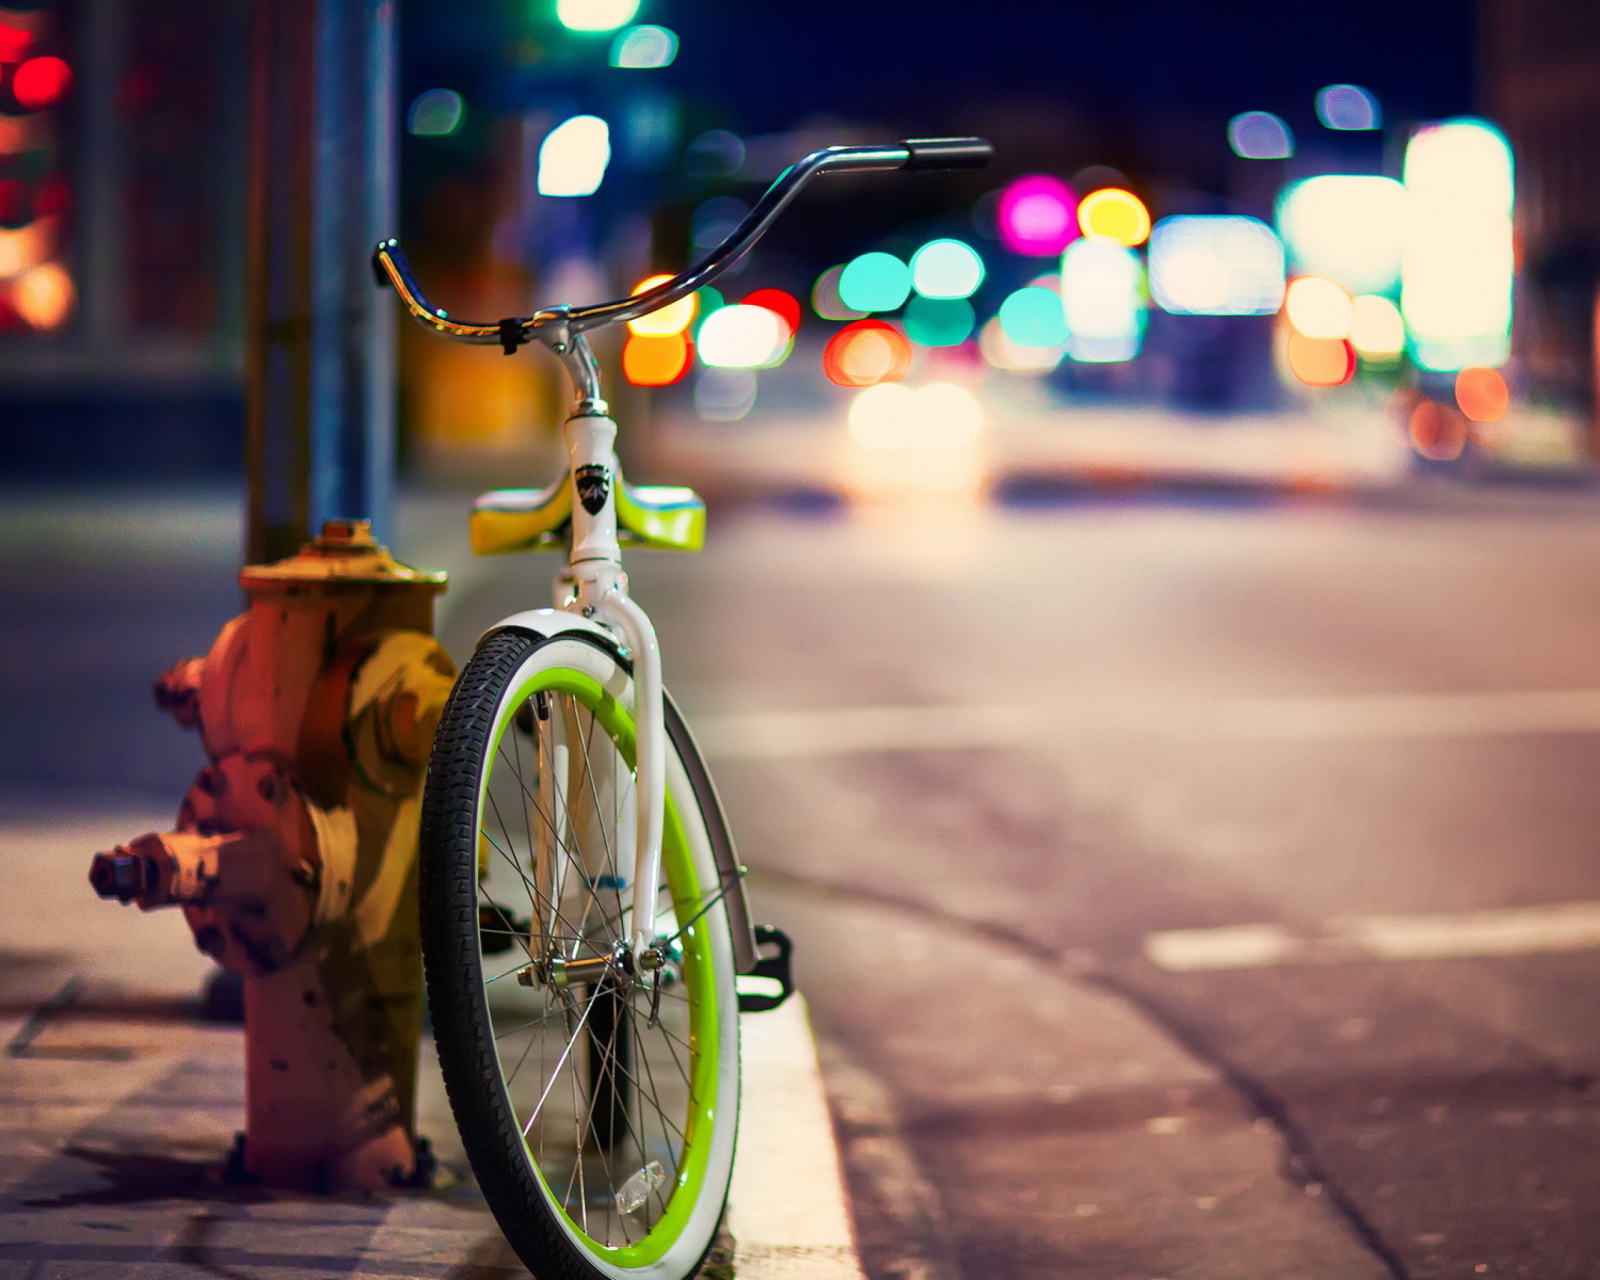 Das Green Bicycle In City Lights Wallpaper 1600x1280